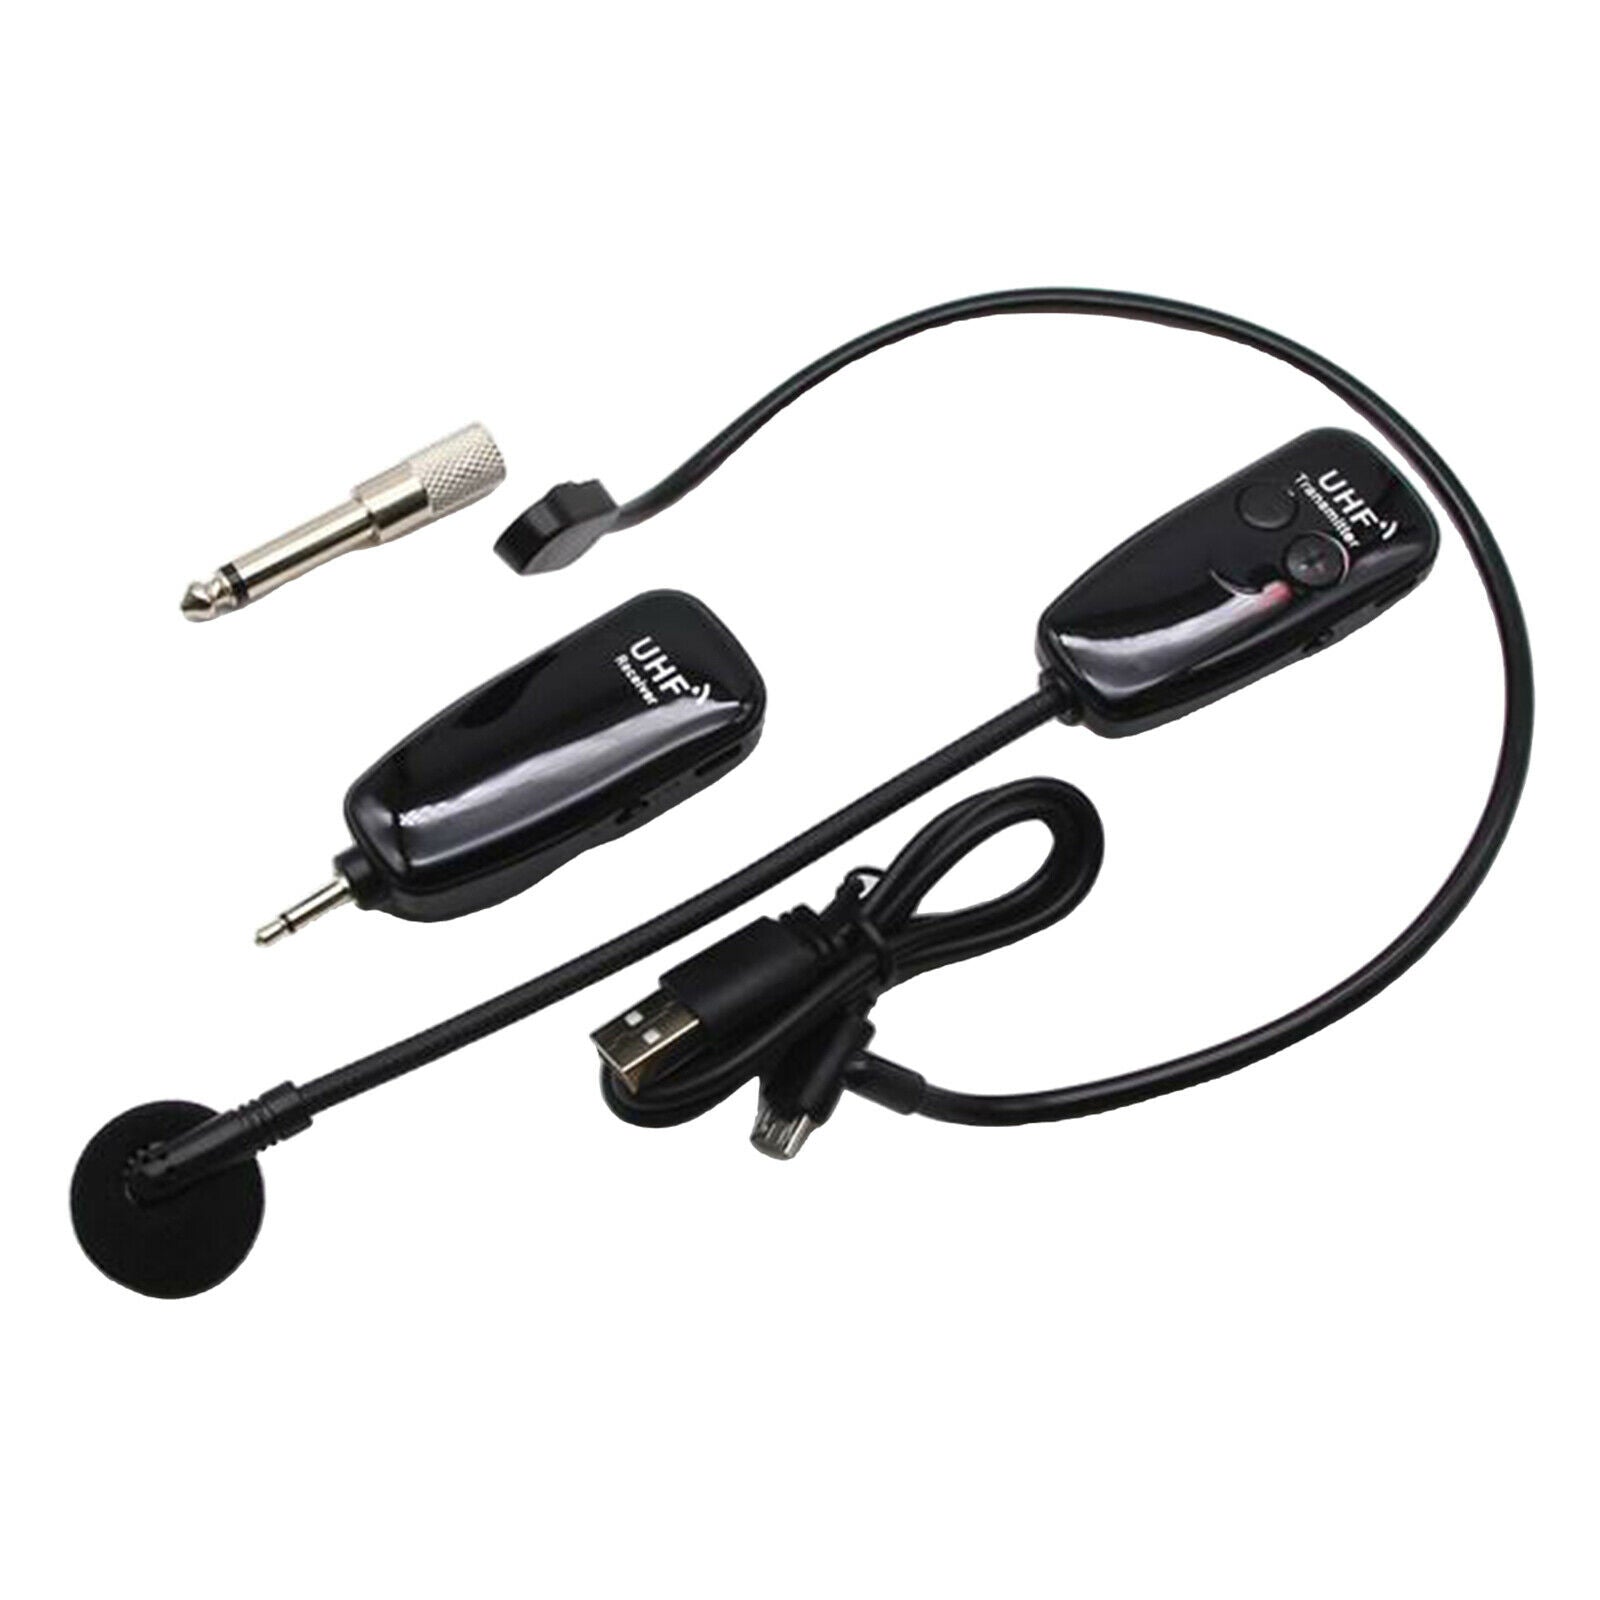 Wireless microphone & amp; Transmitter Headset Mic for Stage Speakers Public